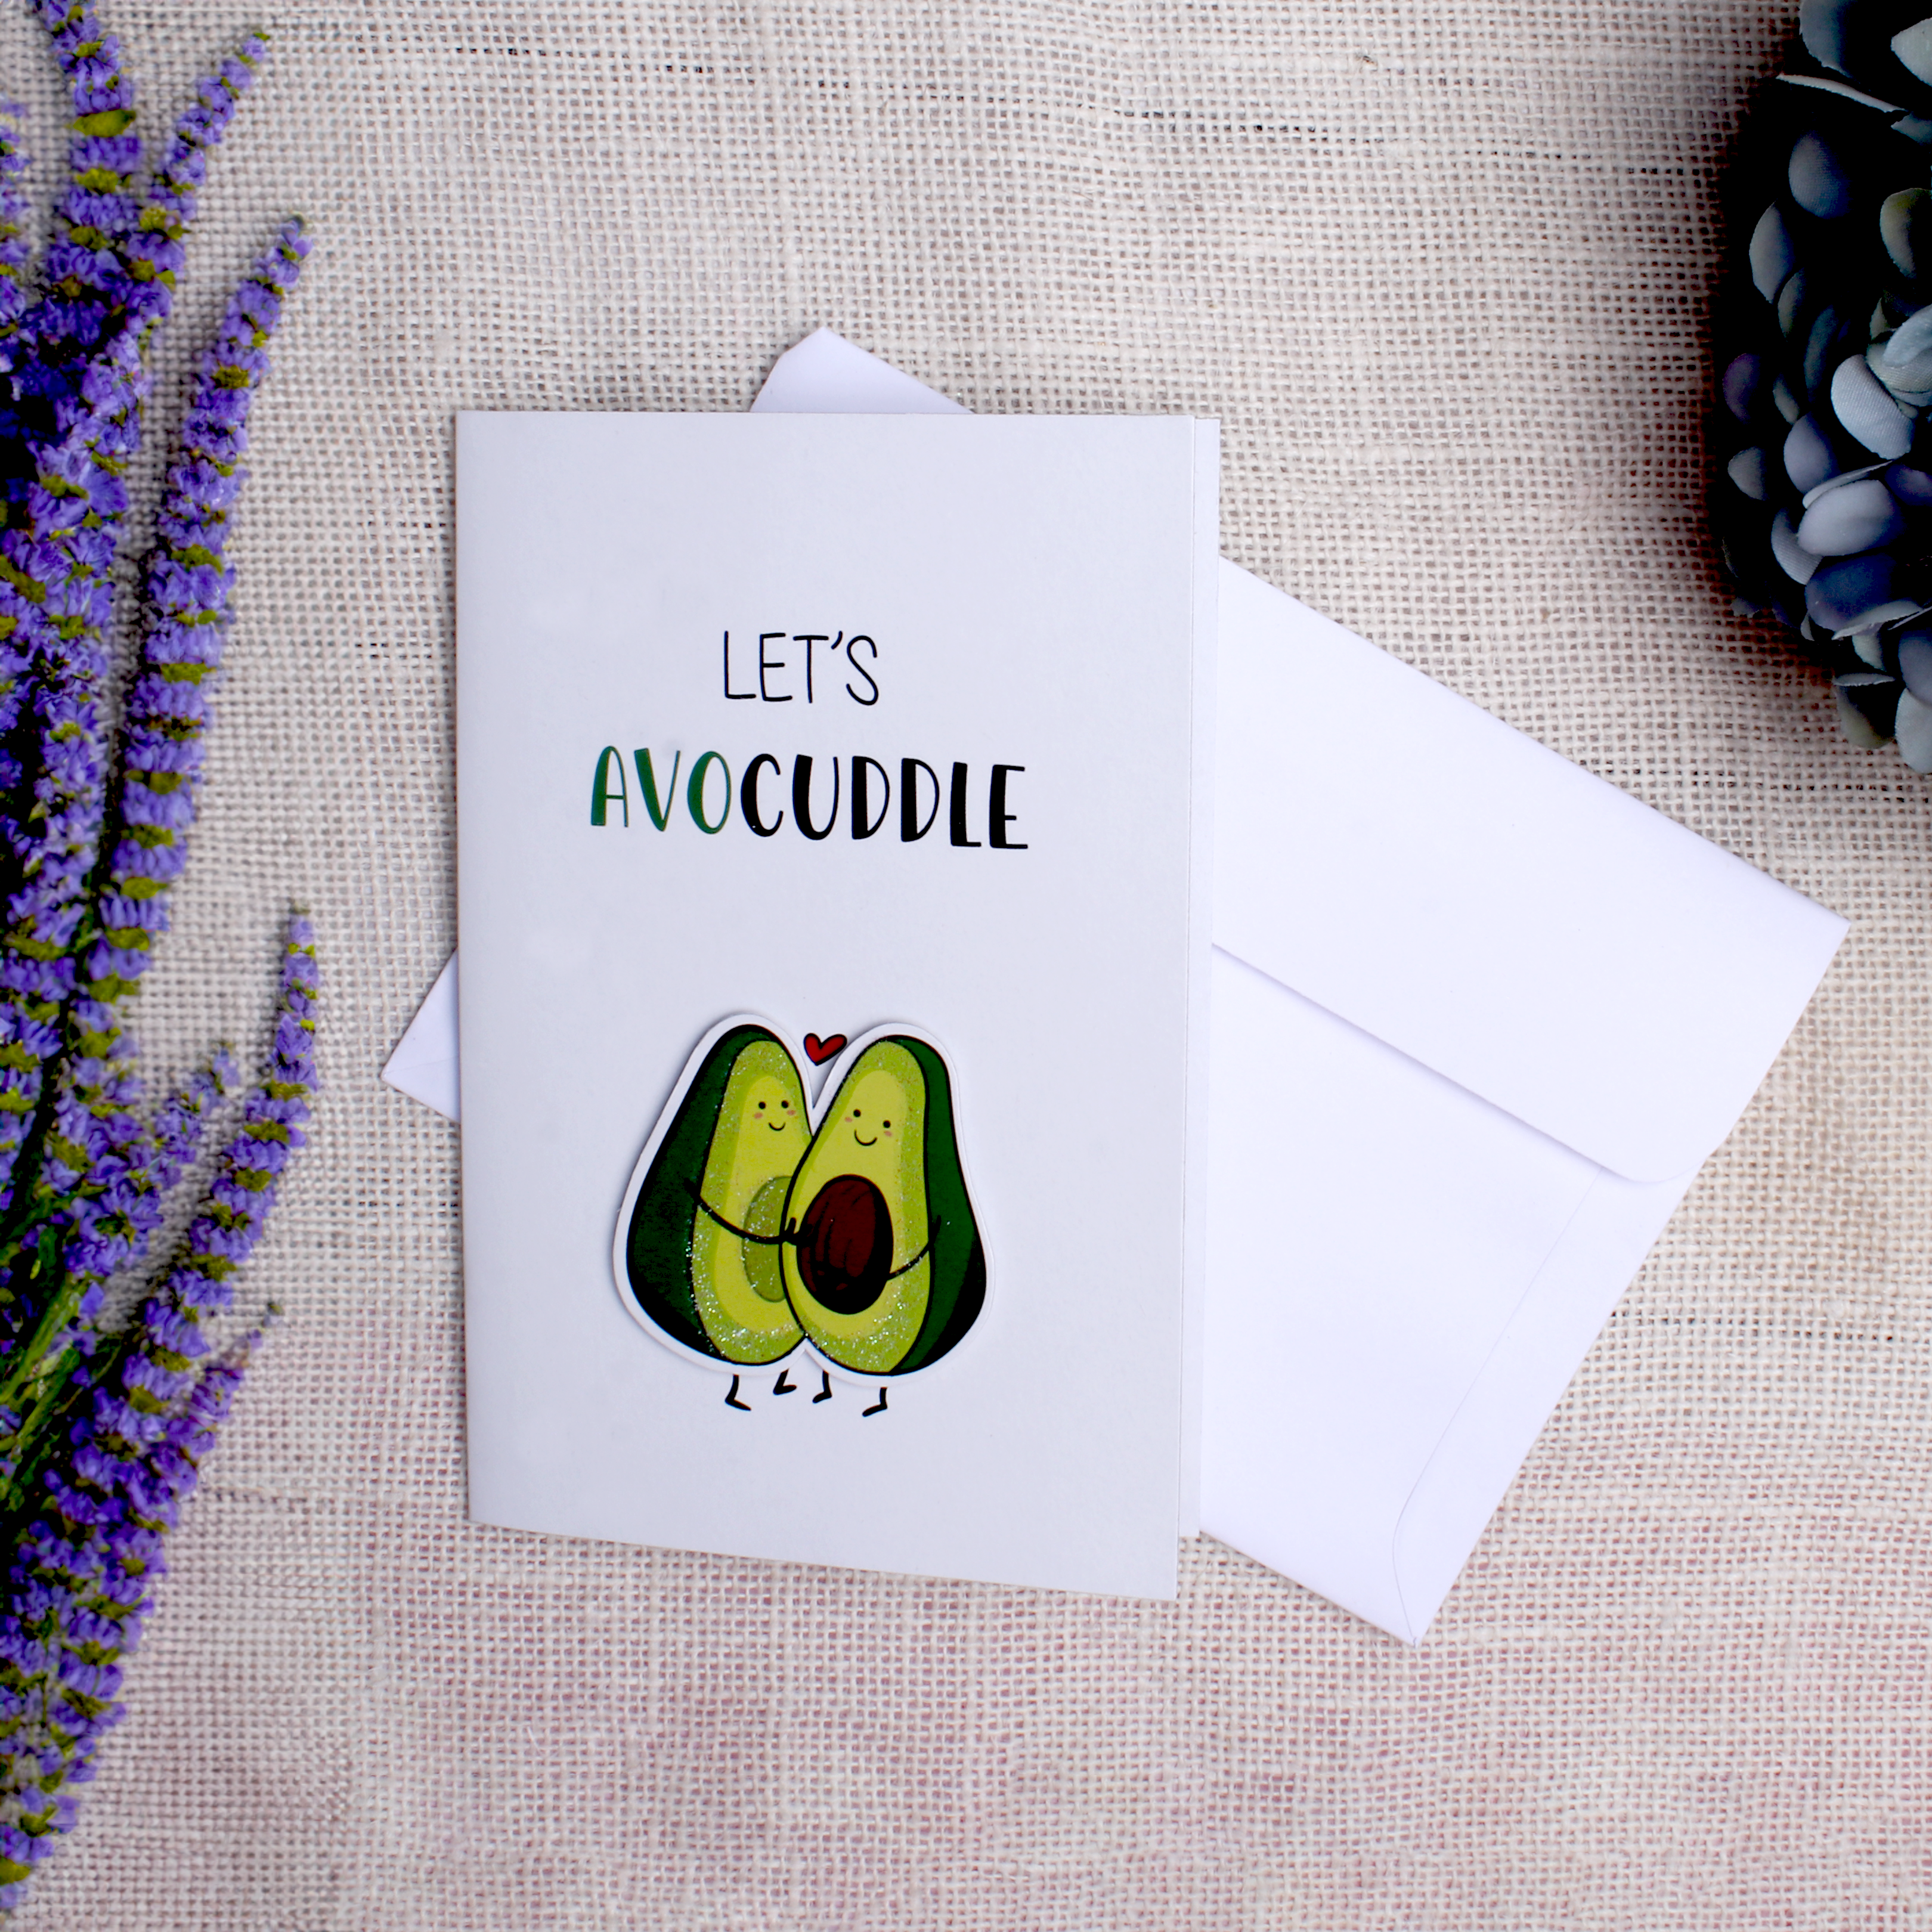 Greeting Card & Envelope Let's Avocuddle 4 X 6inch 2pc